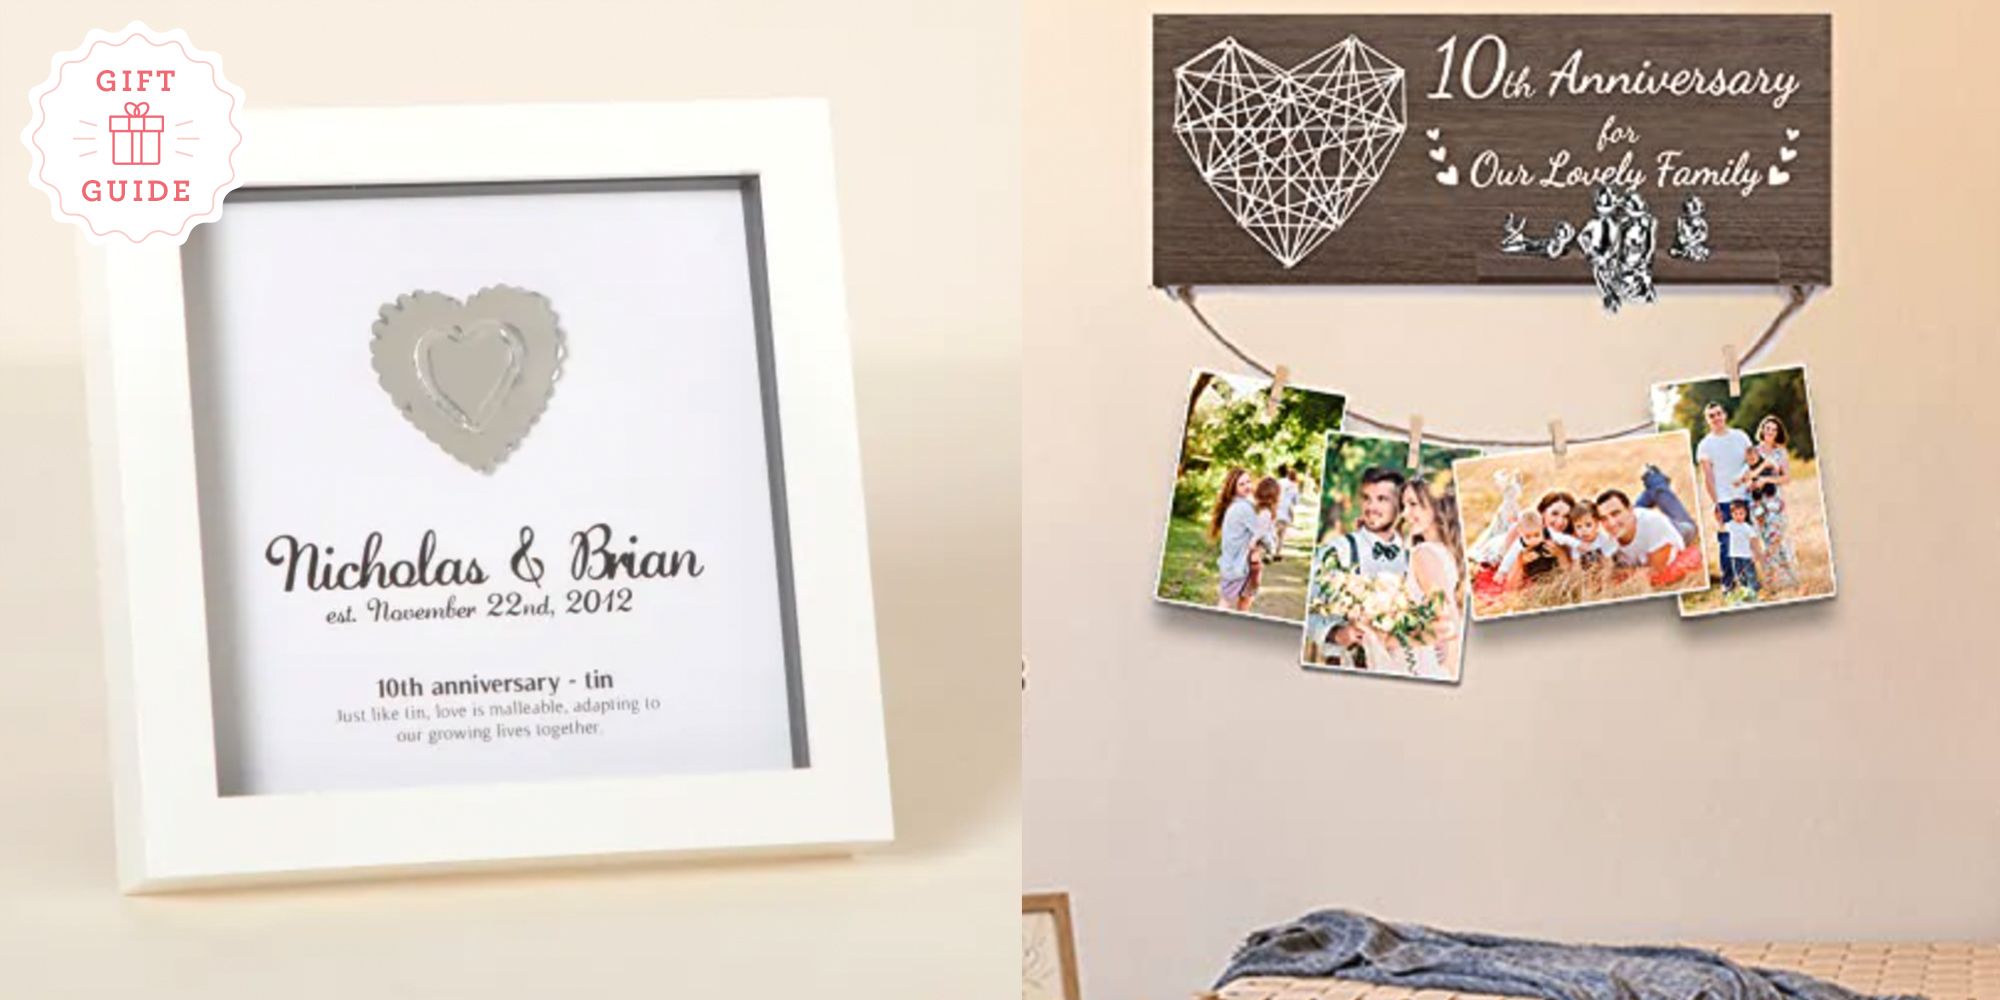 Wedding Gift for a Couple | Best Anniversary Gifts | Personalized Gifts |  Glass Etching Fever